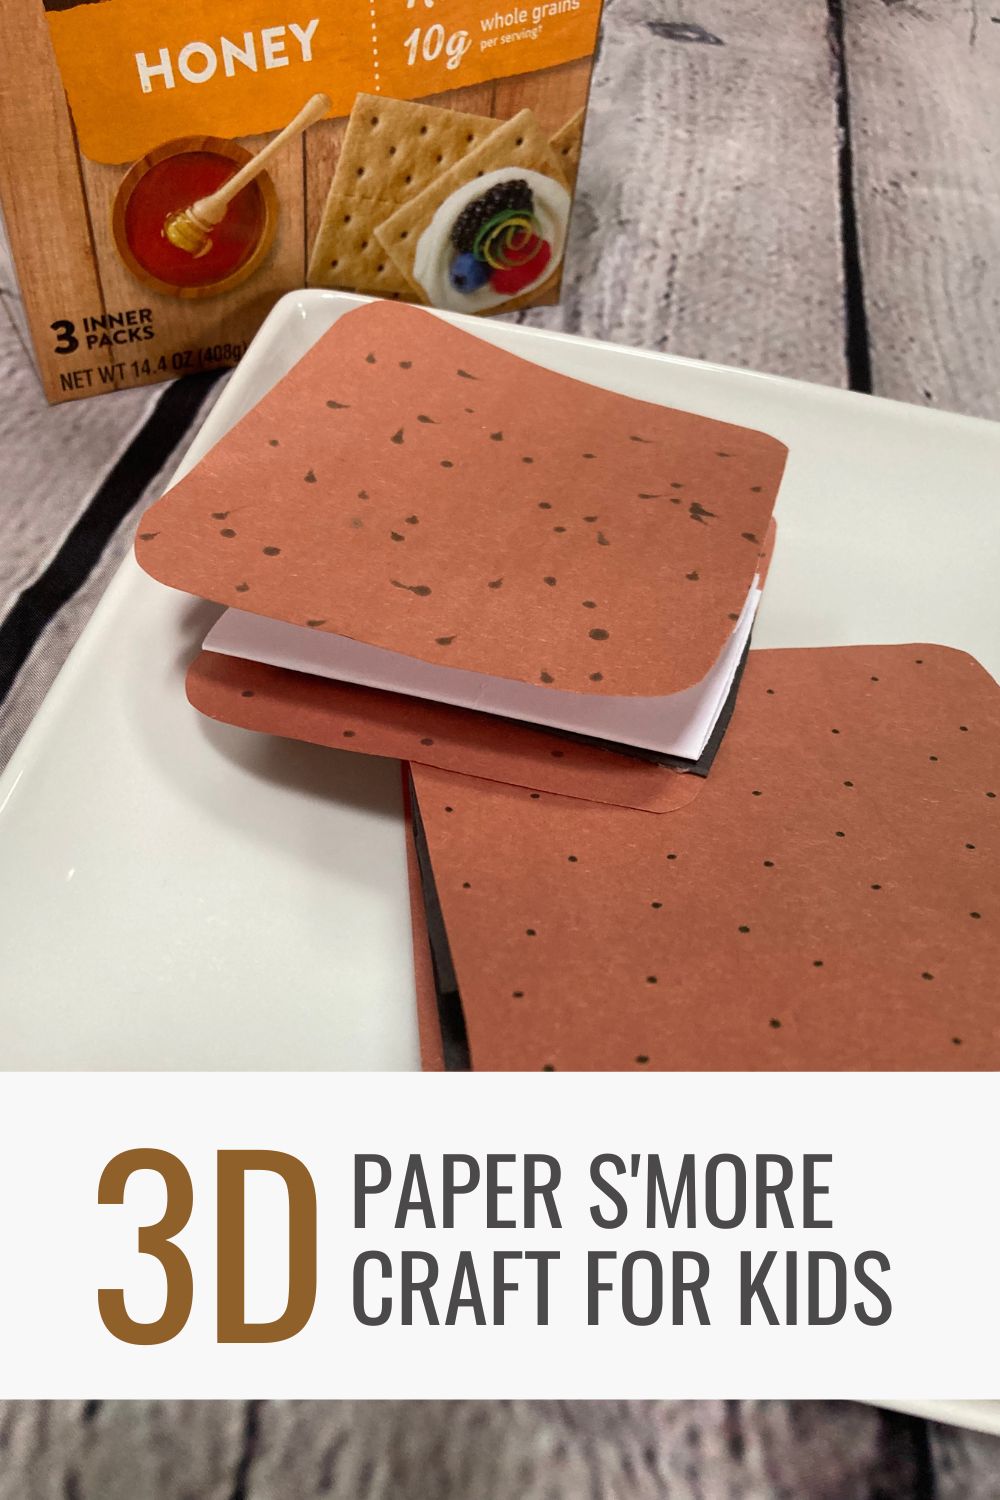 3D paper smores craft for kids